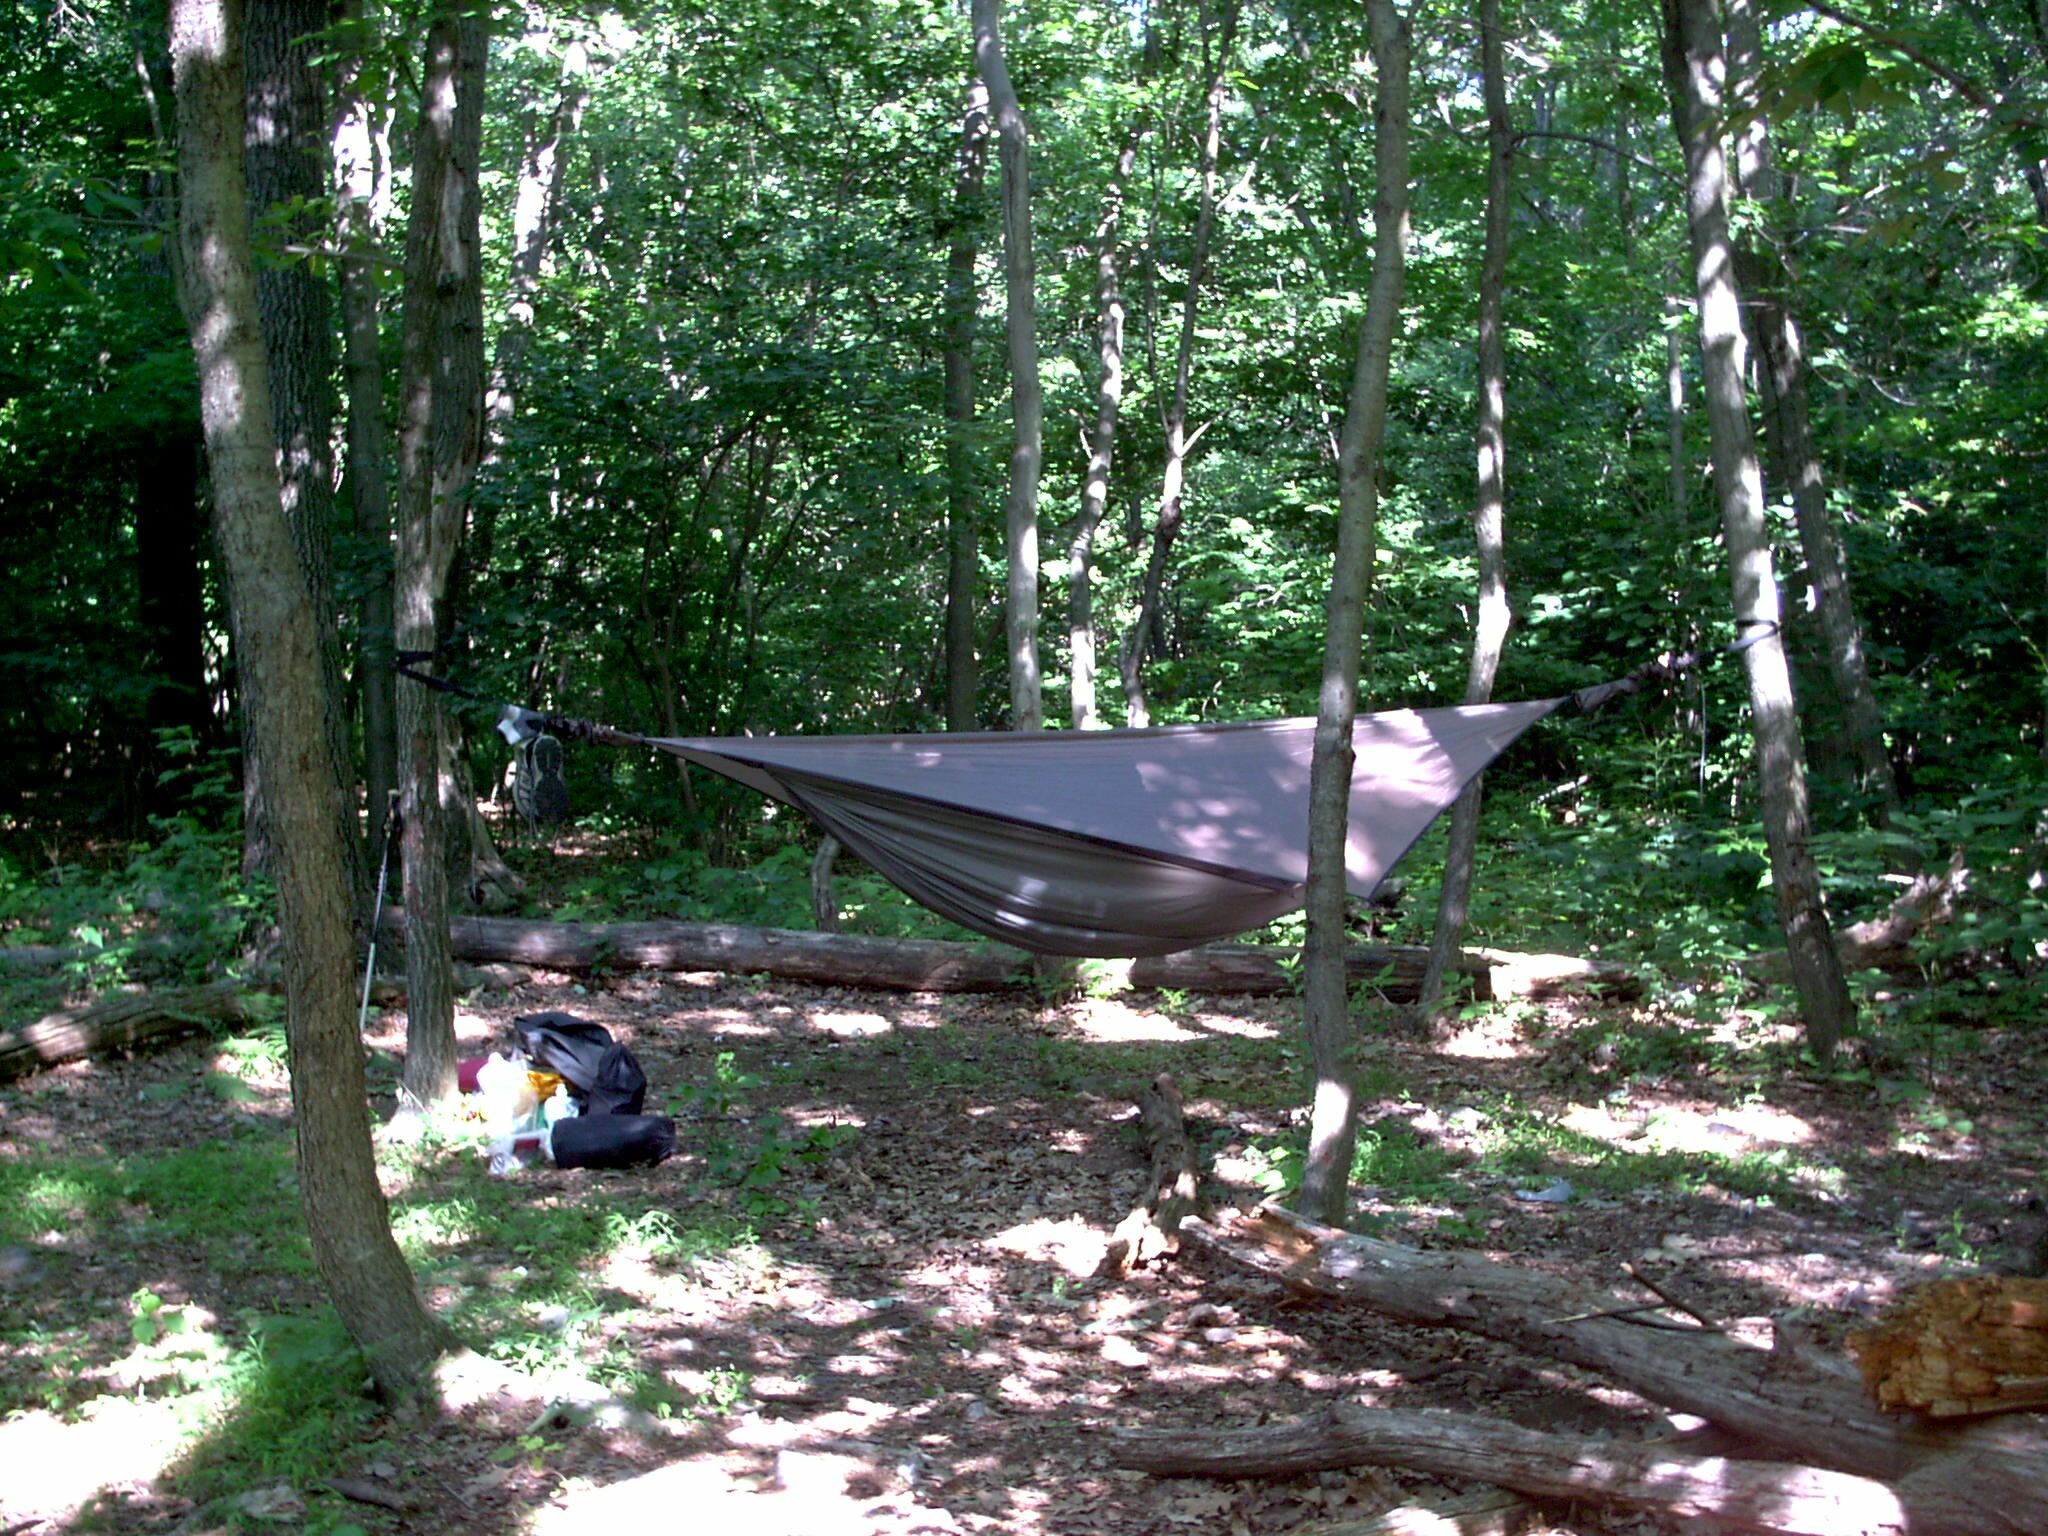 MM 8.8 - My hammock hung at Applebee Campsite .5 miles north of 501 Shelter. A very nice site maintained by the same ranger as 501, with ring, several sites and register.  Courtesy stewartriley@earthlink.net